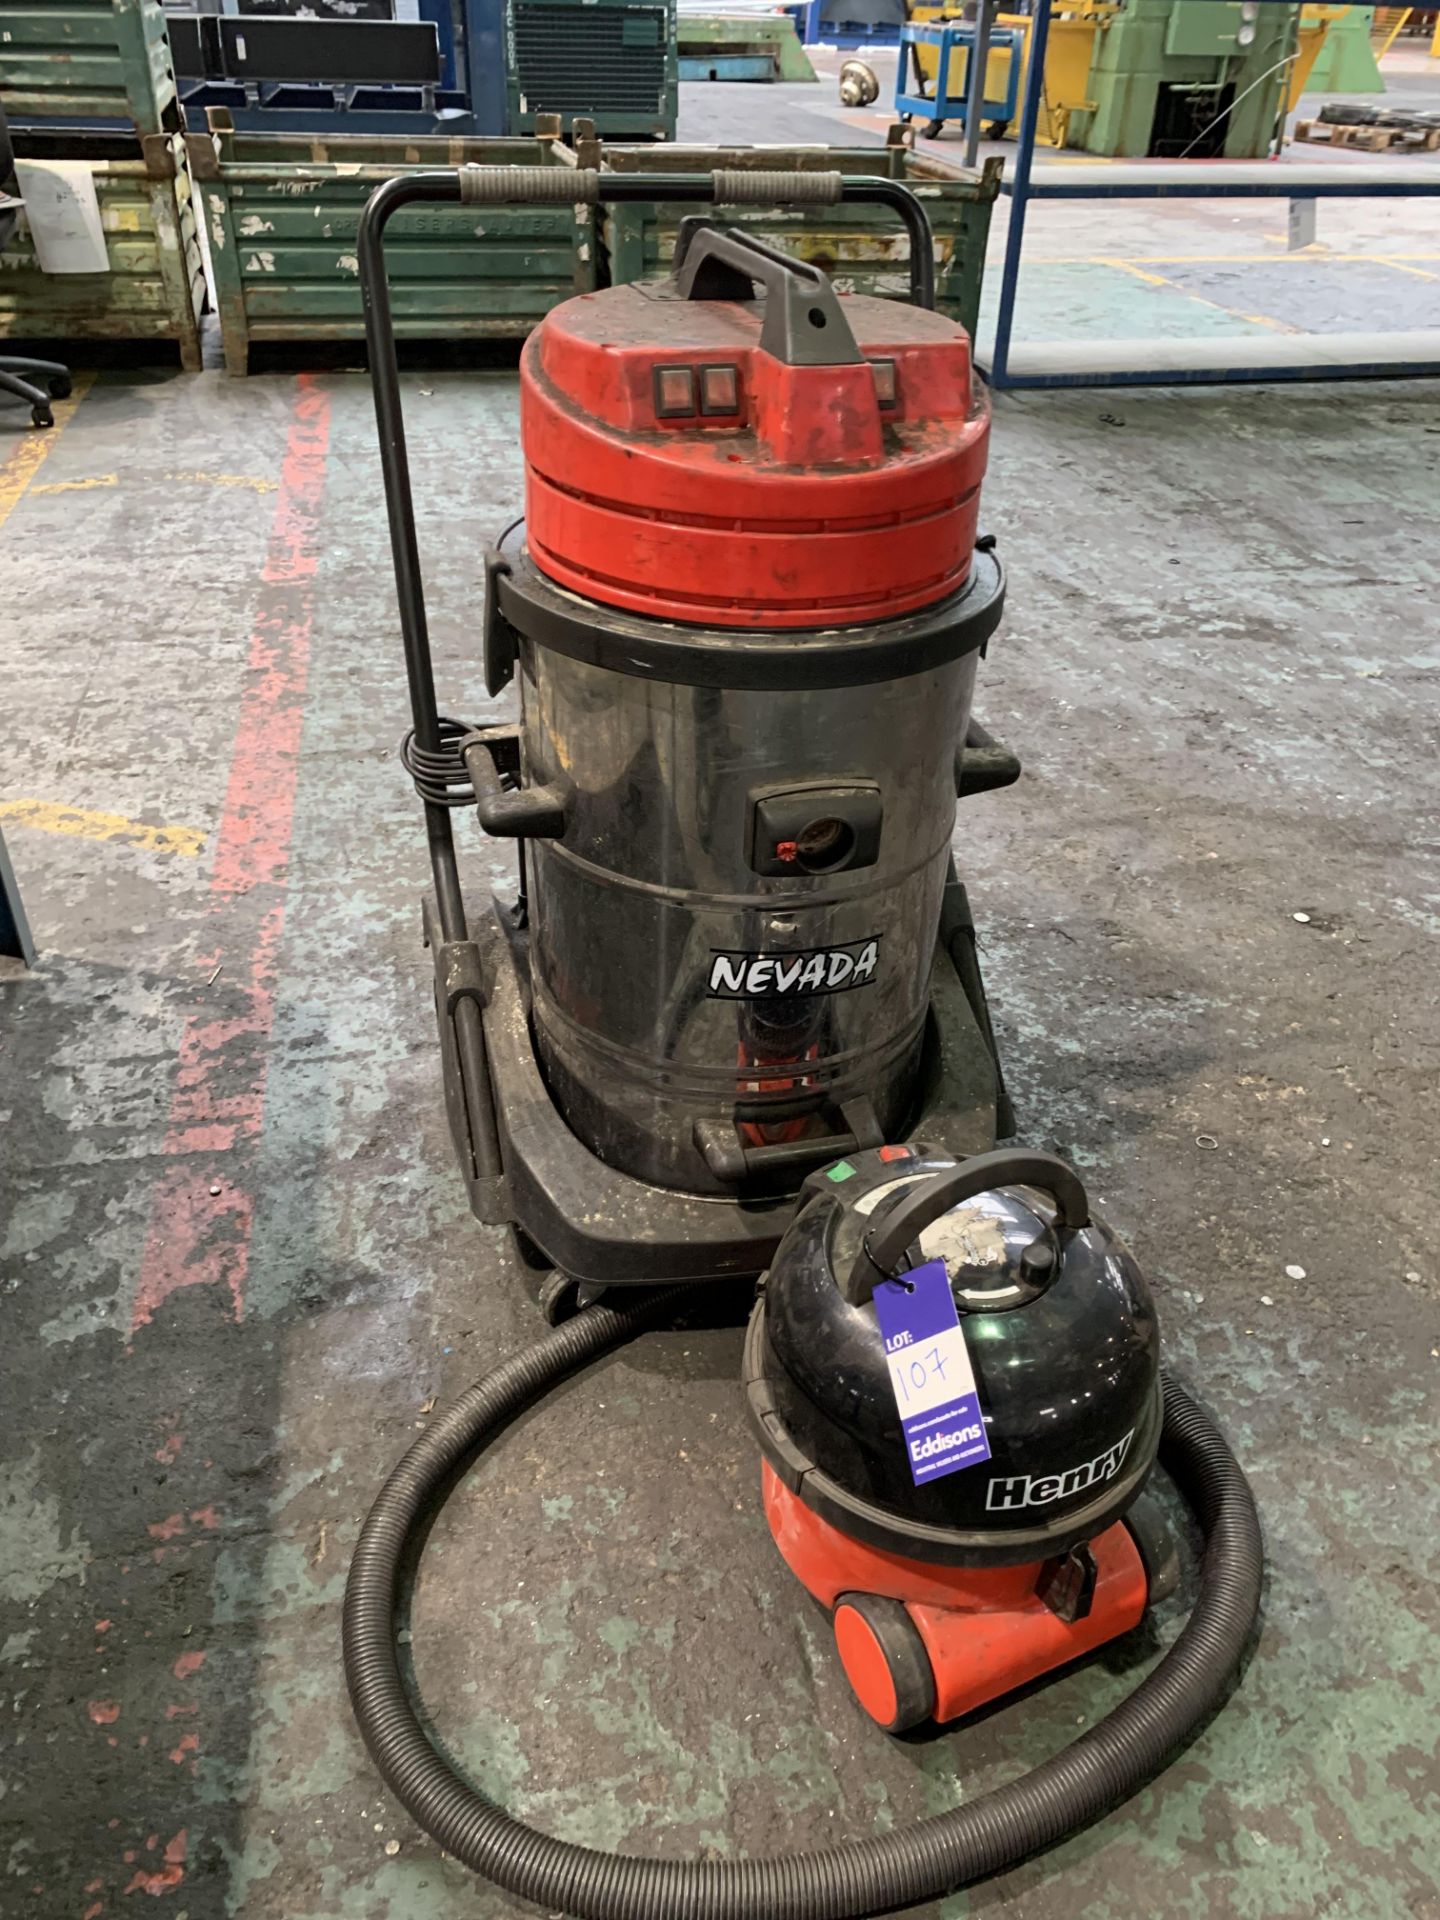 Henry Hoover and Nevada Commercial Vacuums.